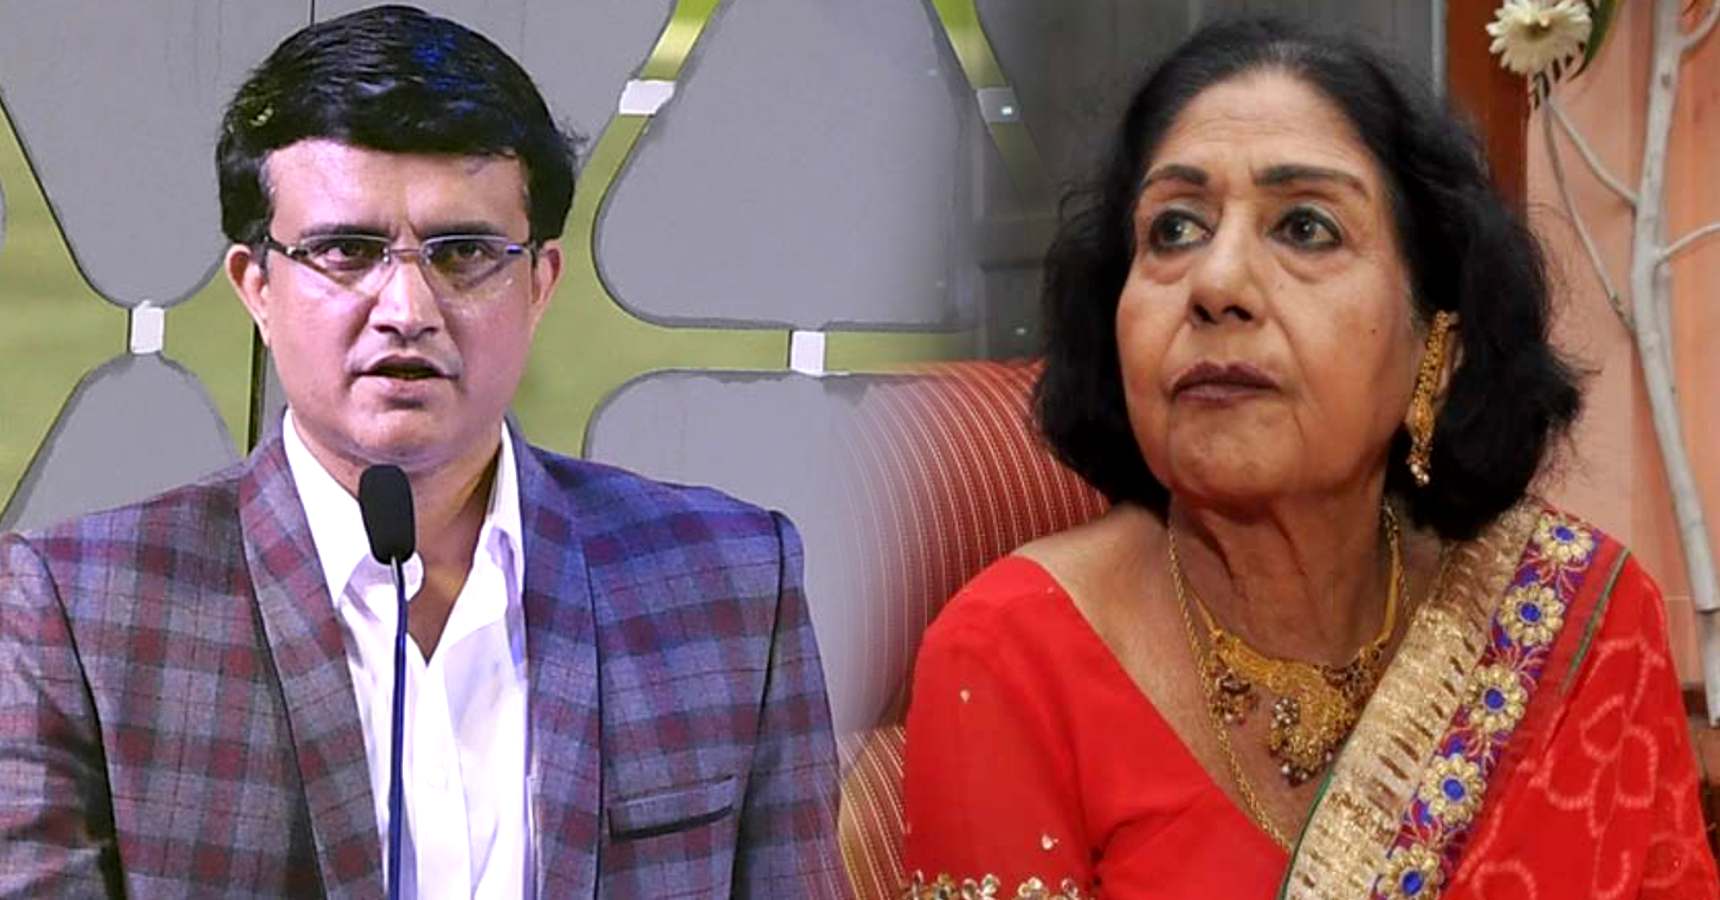 Sabitri Chatterjee says Bikash Roy didn’t give him any money for movie